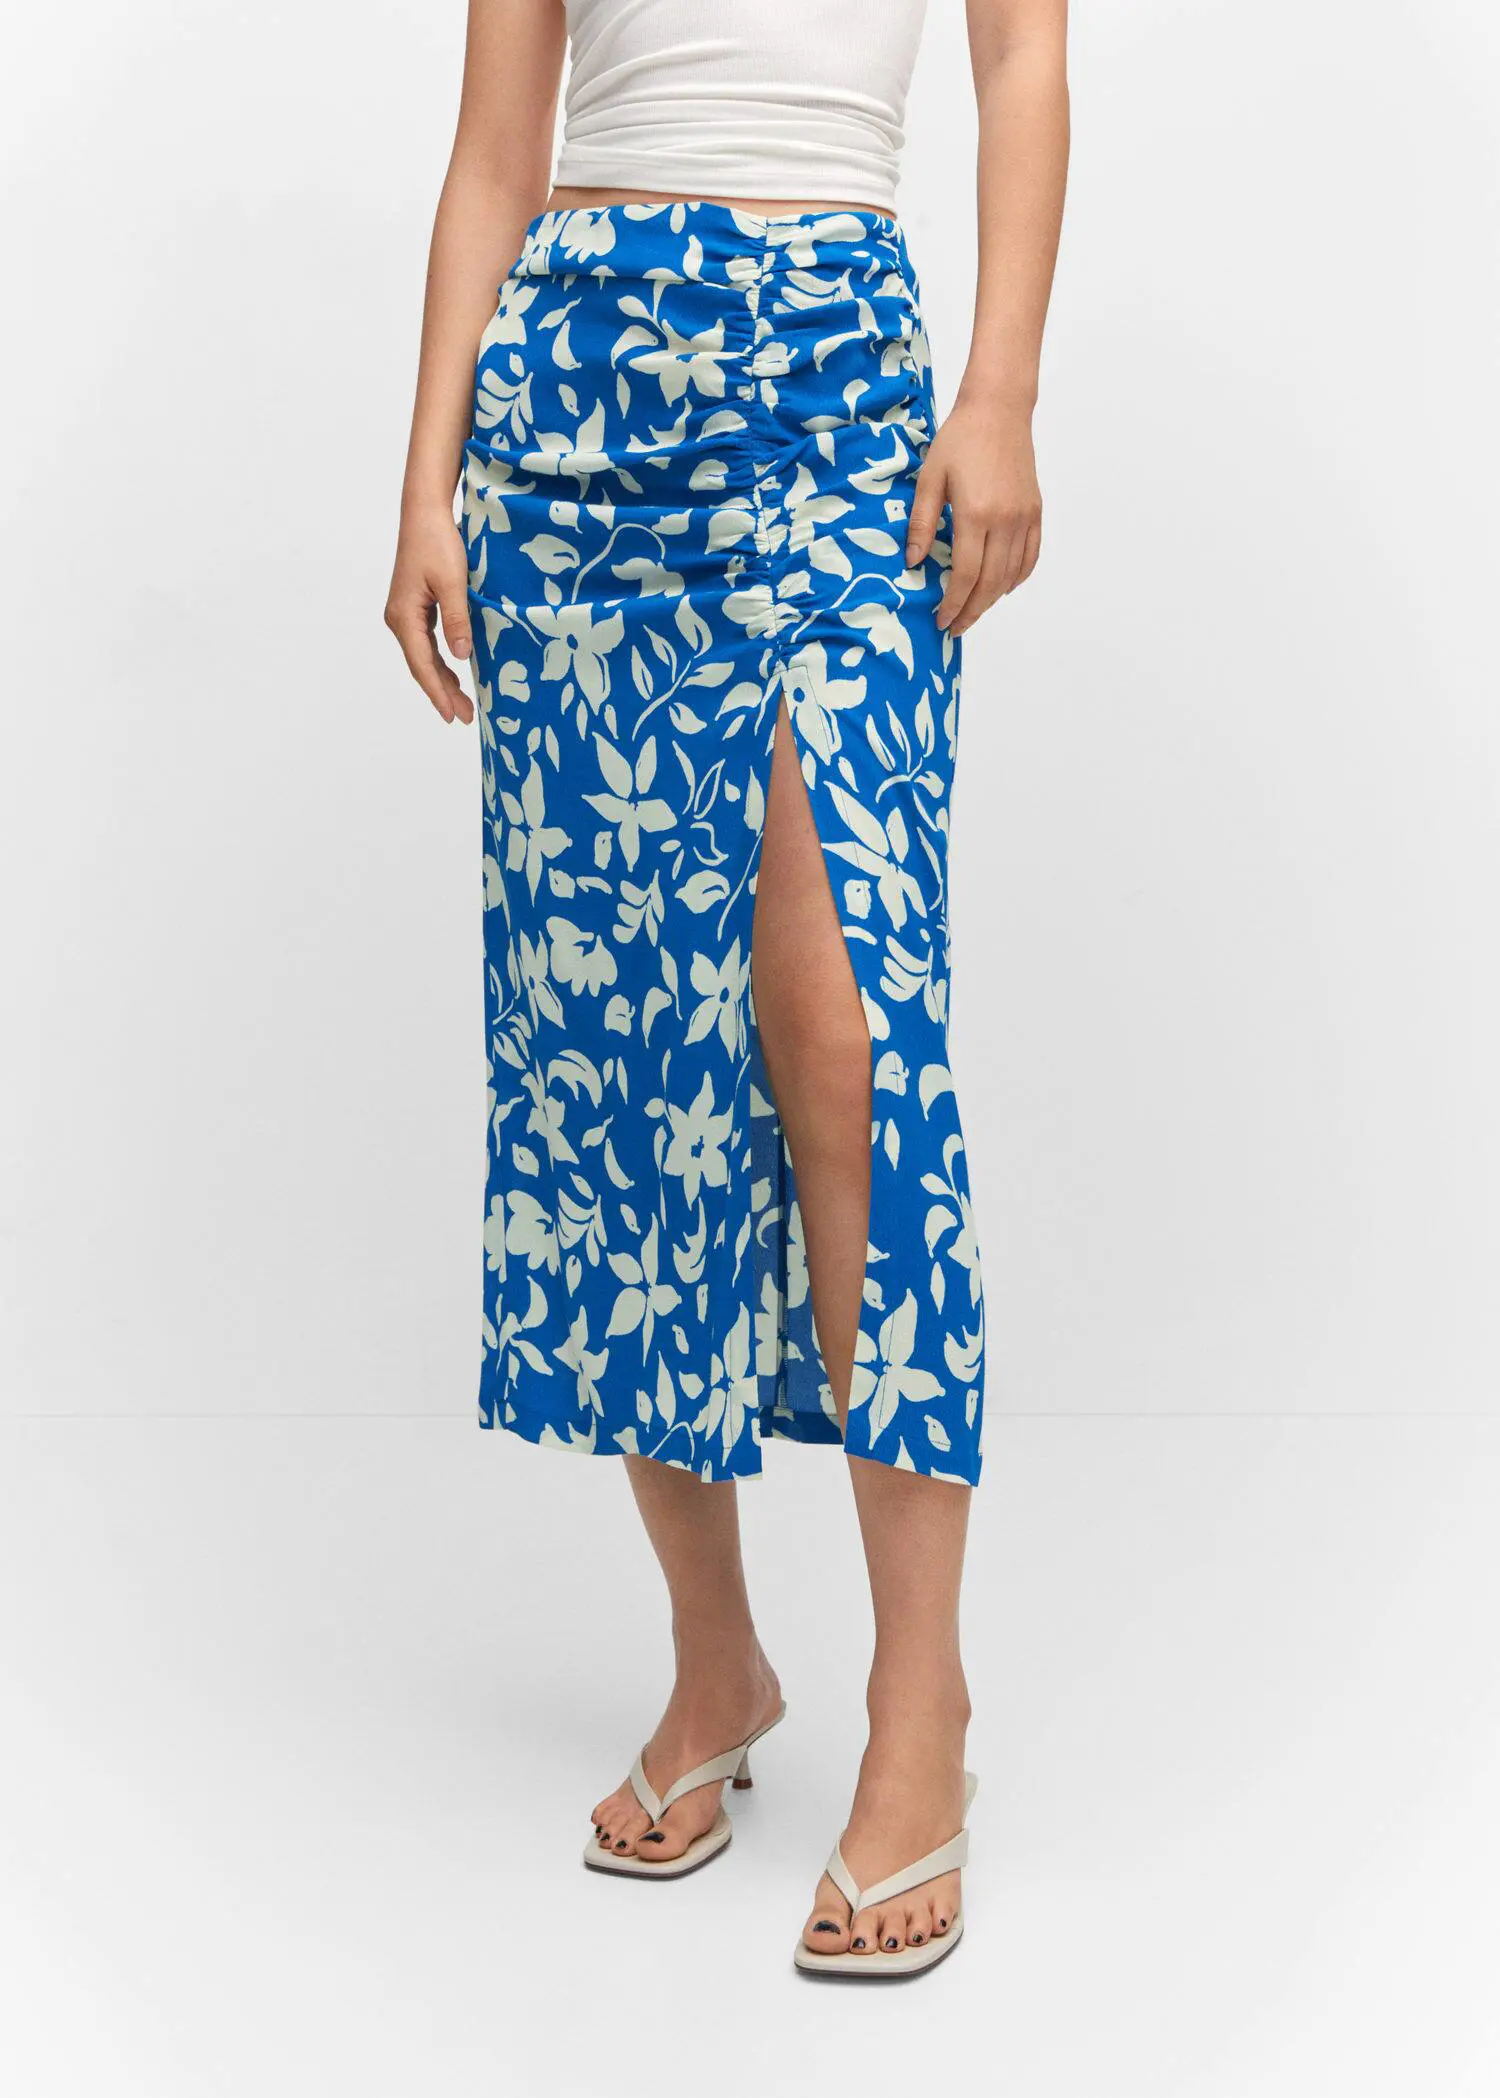 Mango Printed skirt with slit. a woman wearing a blue and white floral skirt. 